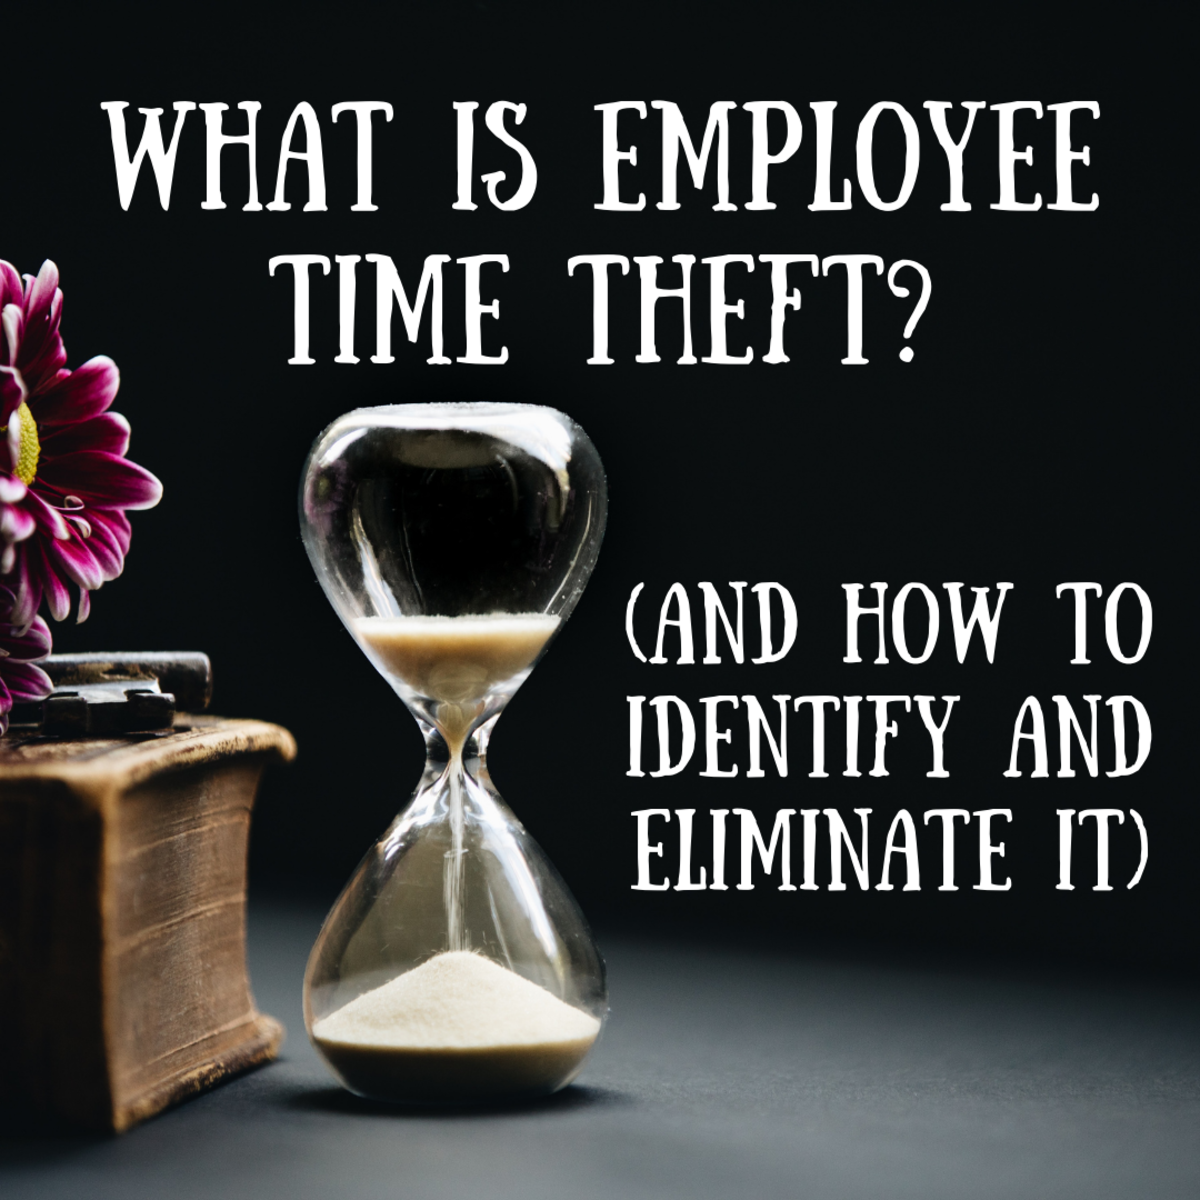 Read on to learn what employee time theft is, as well as various ways to identify it and how it might be eliminated. Finally, there is an explanation of wage theft.